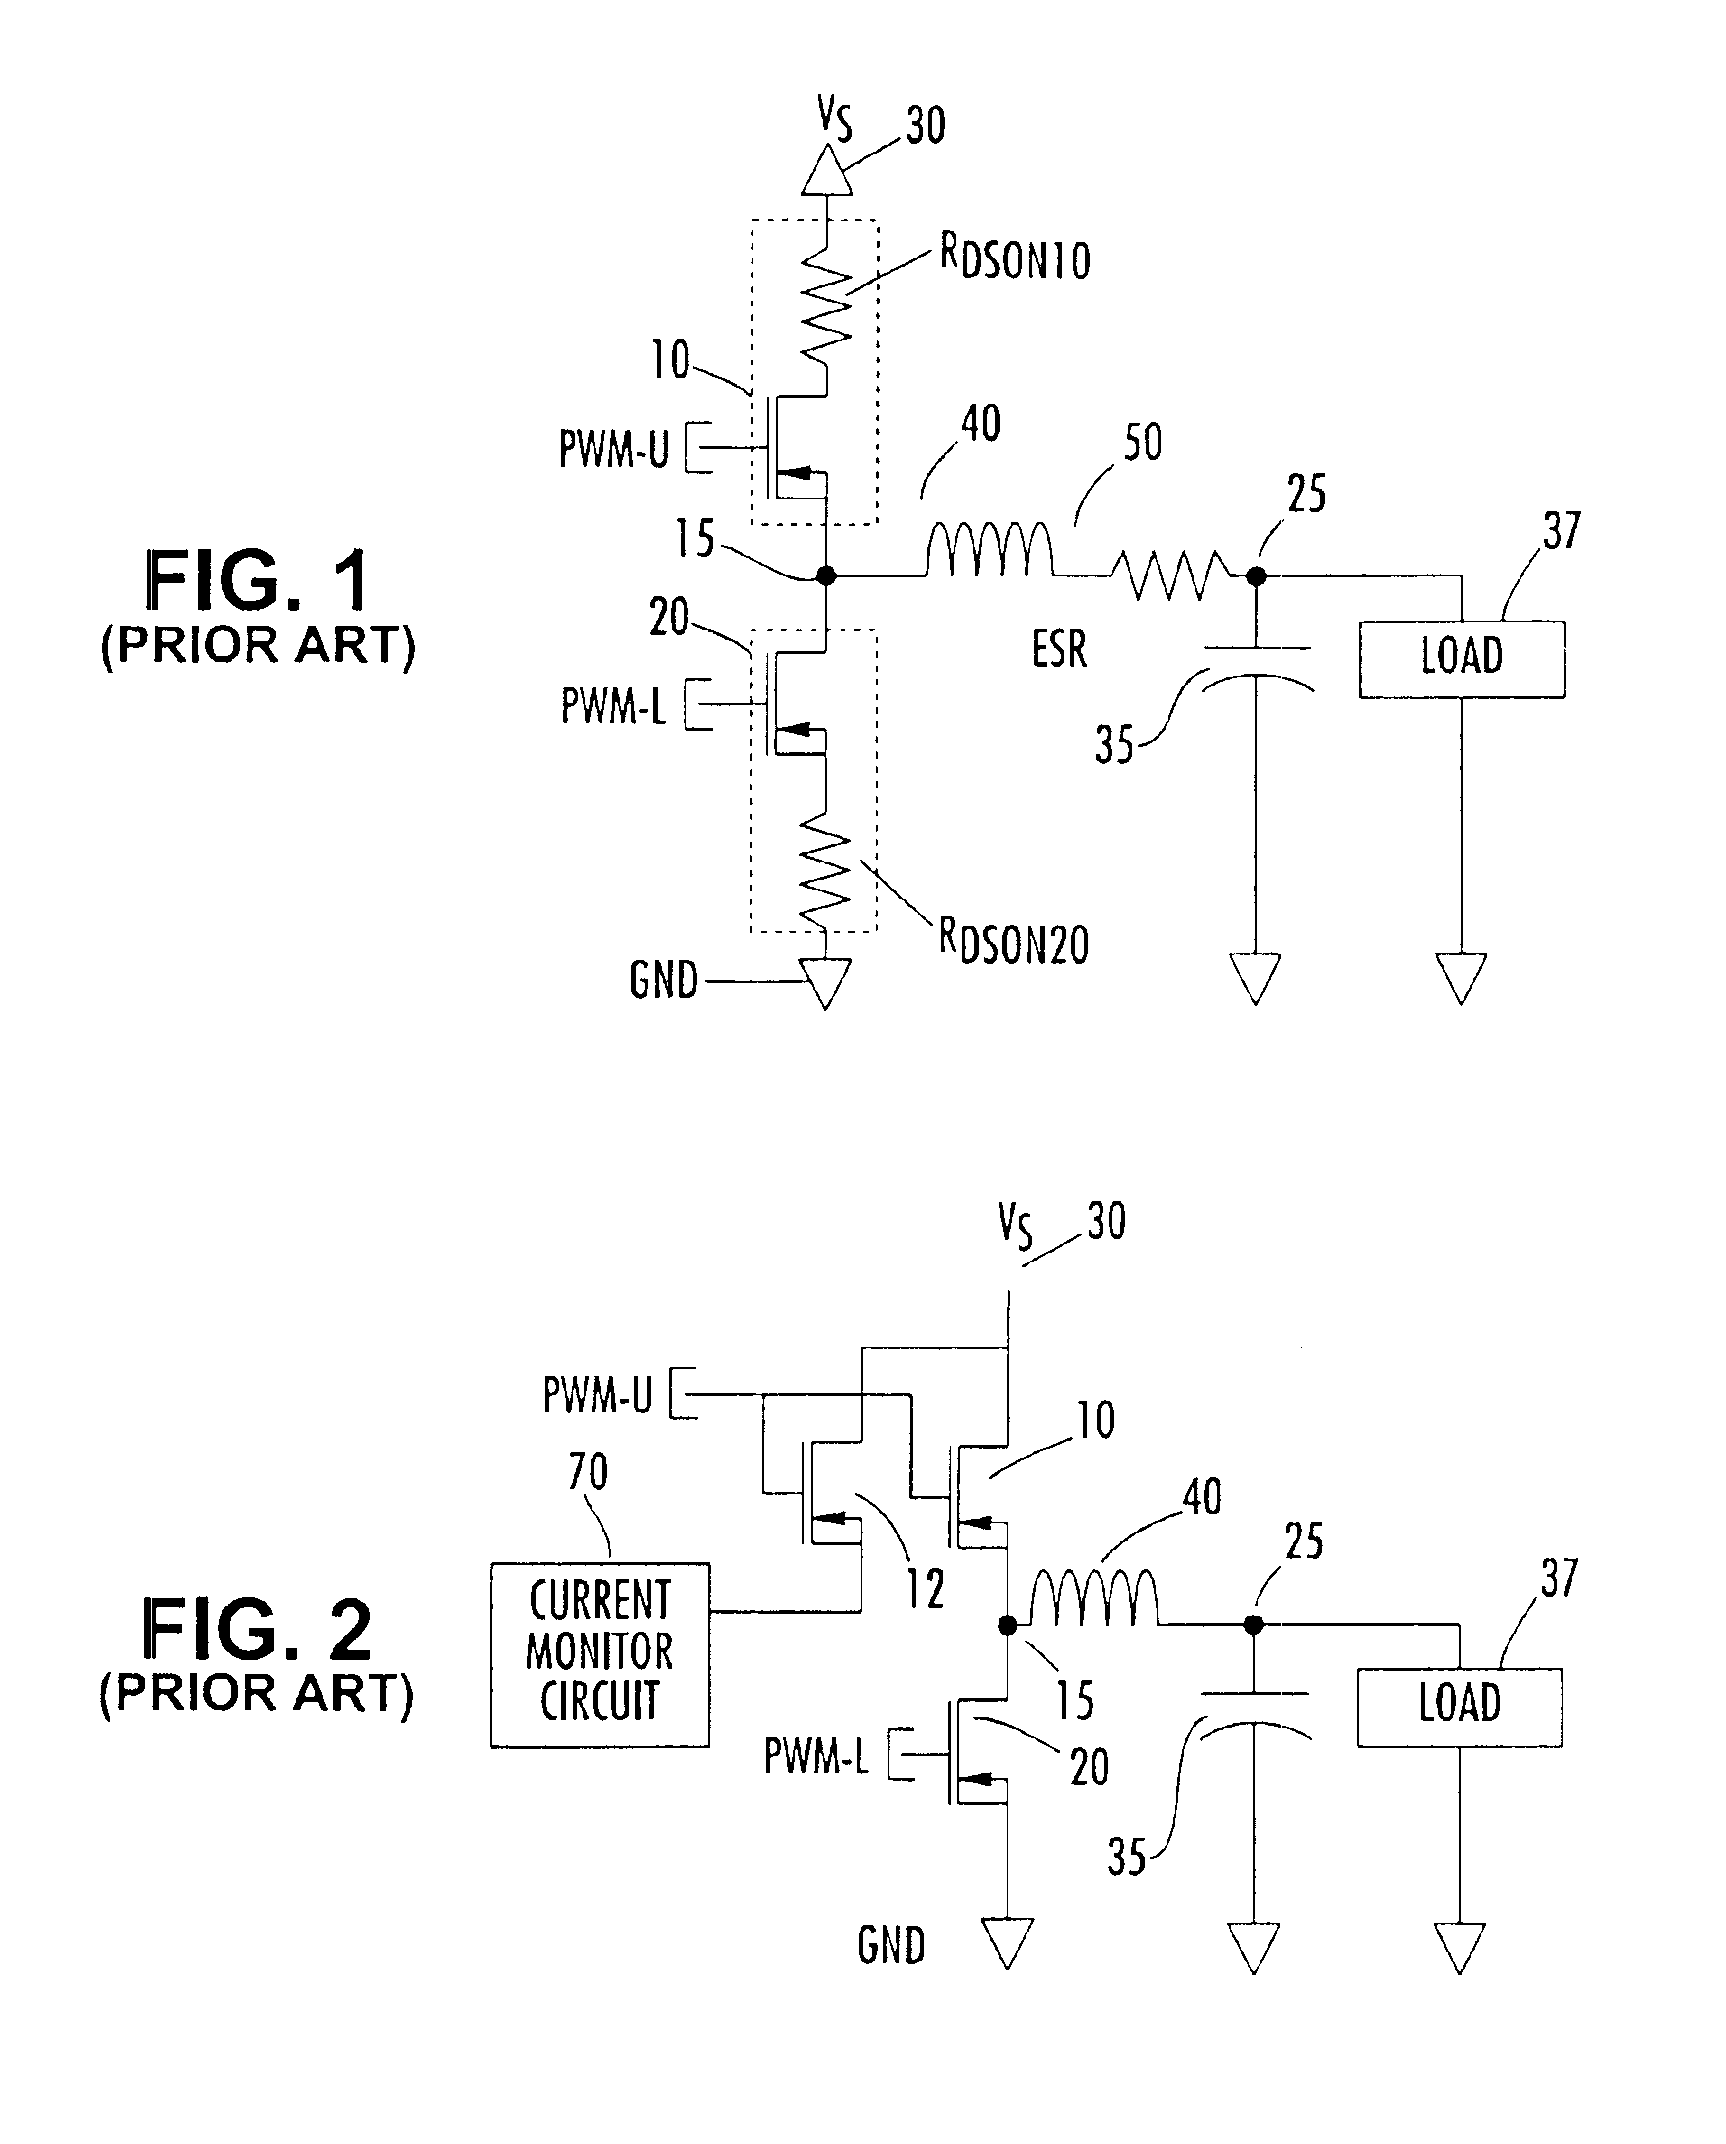 Time division multiplexed, piloted current monitoring in a switched mode DC-DC voltage converter and phase current measurement calibration for a multiphase converter